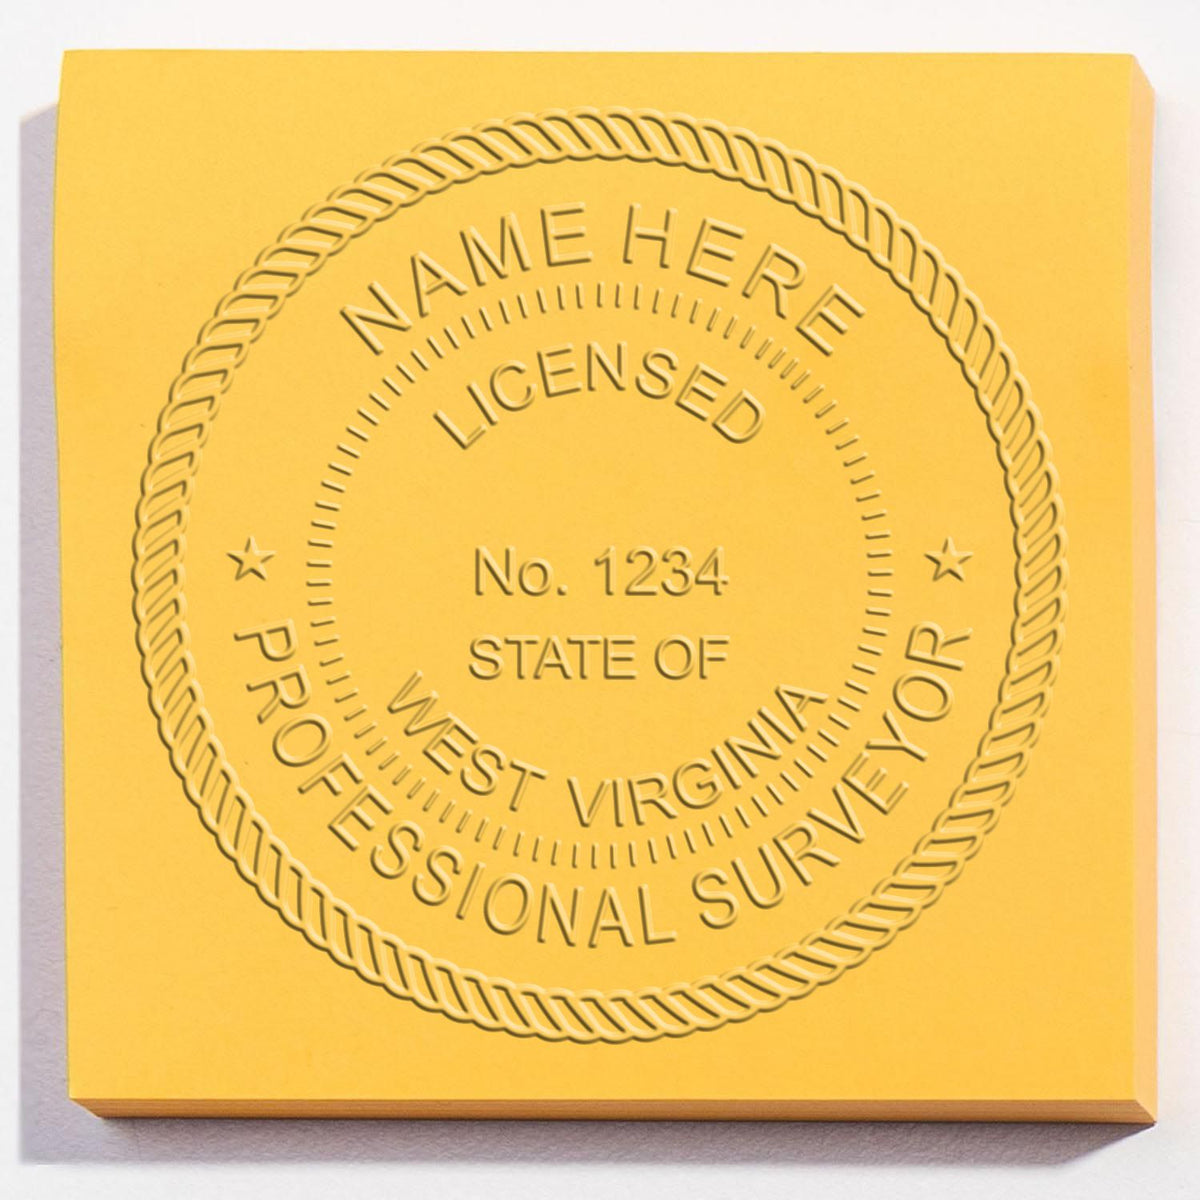 The Gift West Virginia Land Surveyor Seal stamp impression comes to life with a crisp, detailed image stamped on paper - showcasing true professional quality.